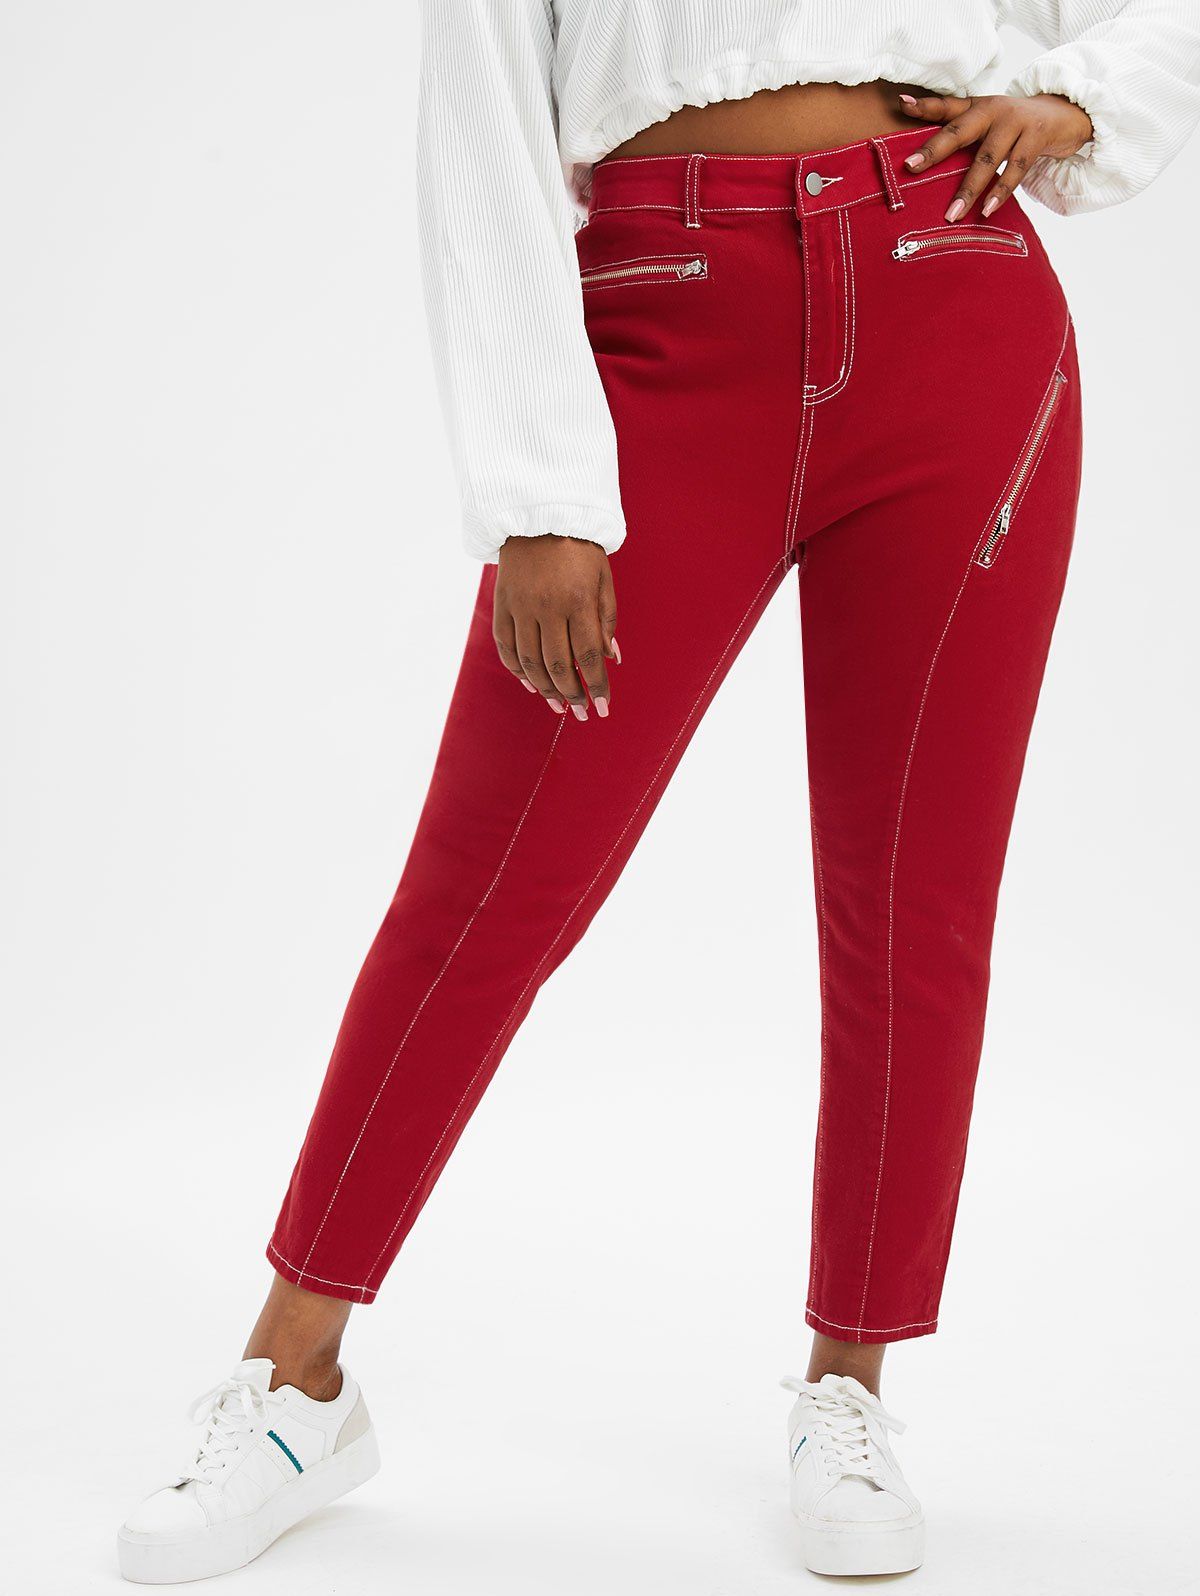 Zippered Front Topstitching Plus Size Skinny Jeans - RED 4X